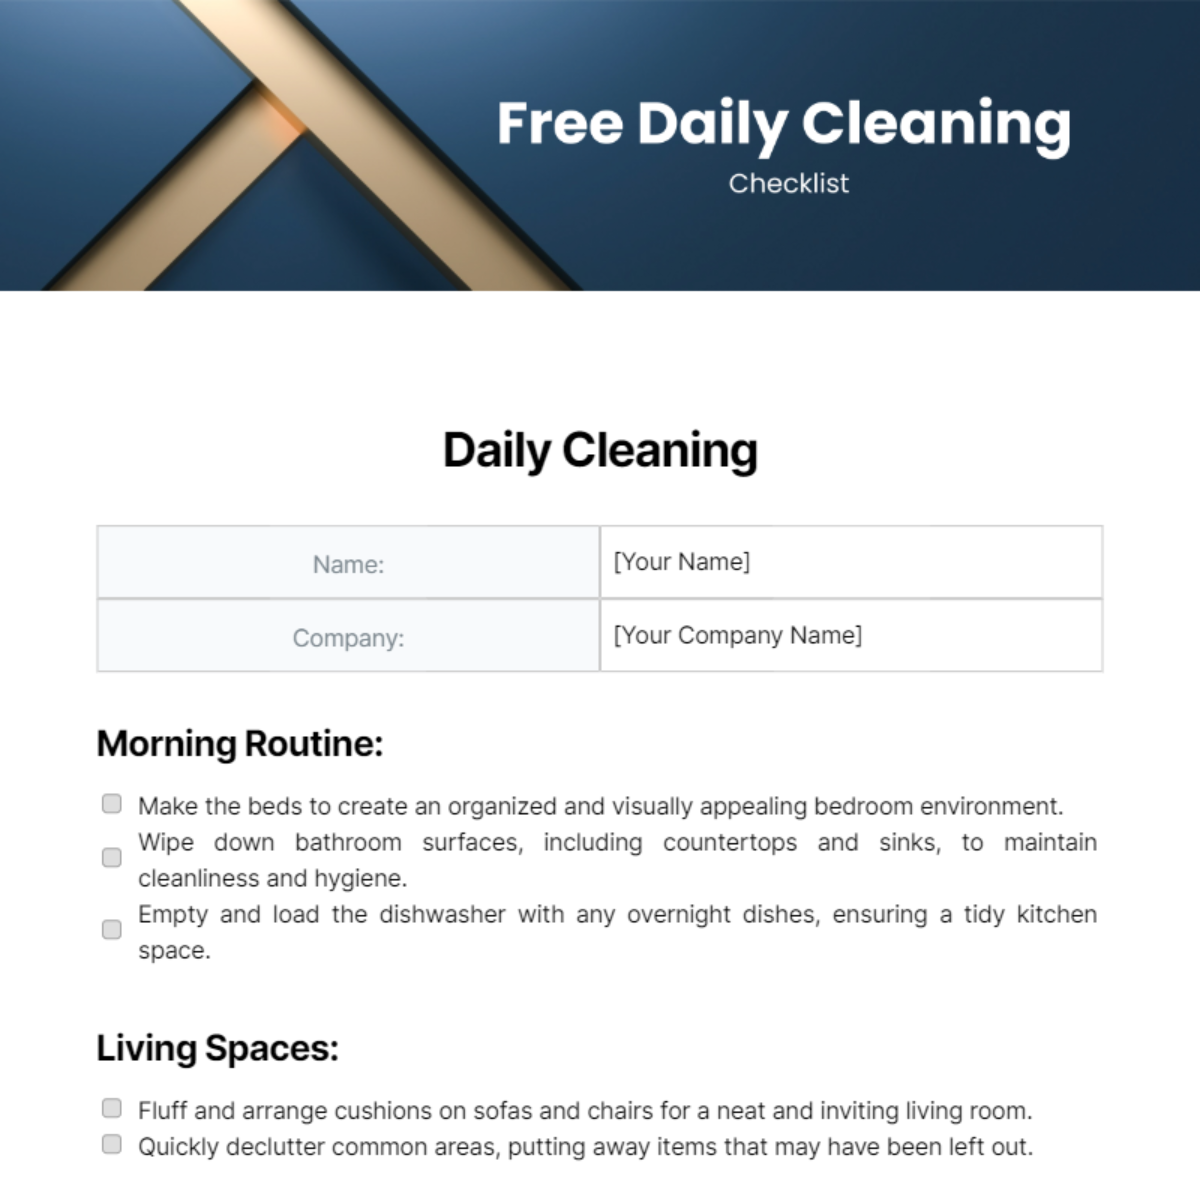 Free Daily Cleaning Checklist Template